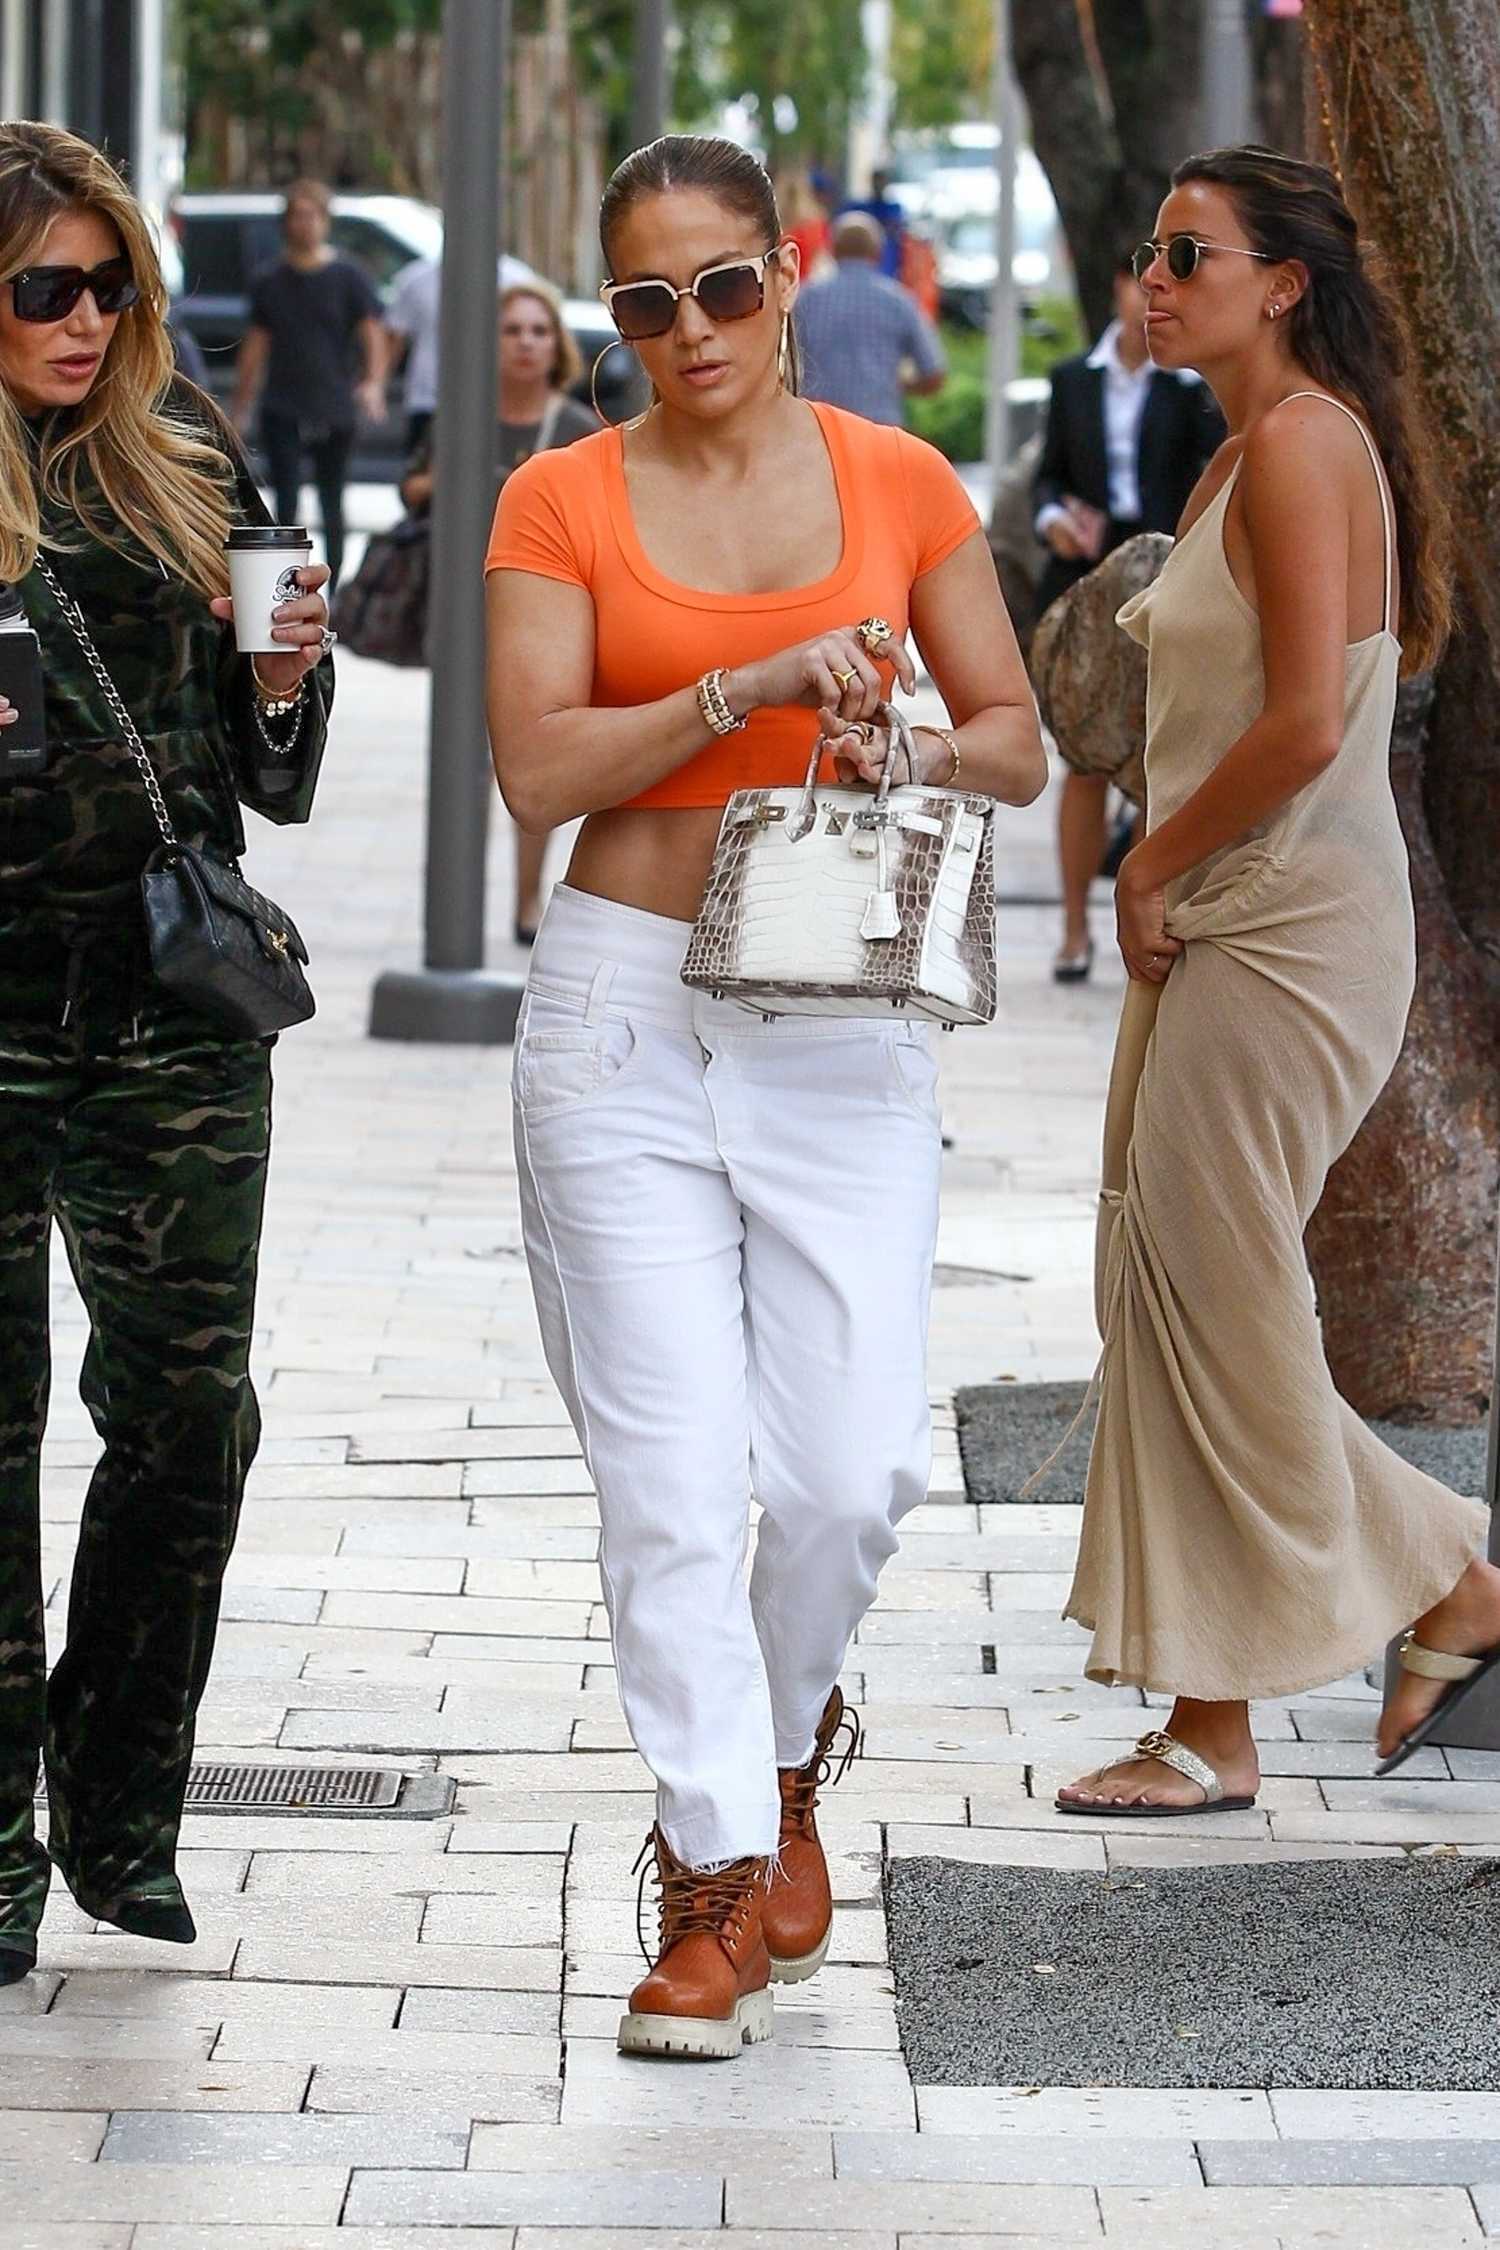 Jennifer Lopez in an Orange Top Out for Shopping in Miami – Celeb Donut